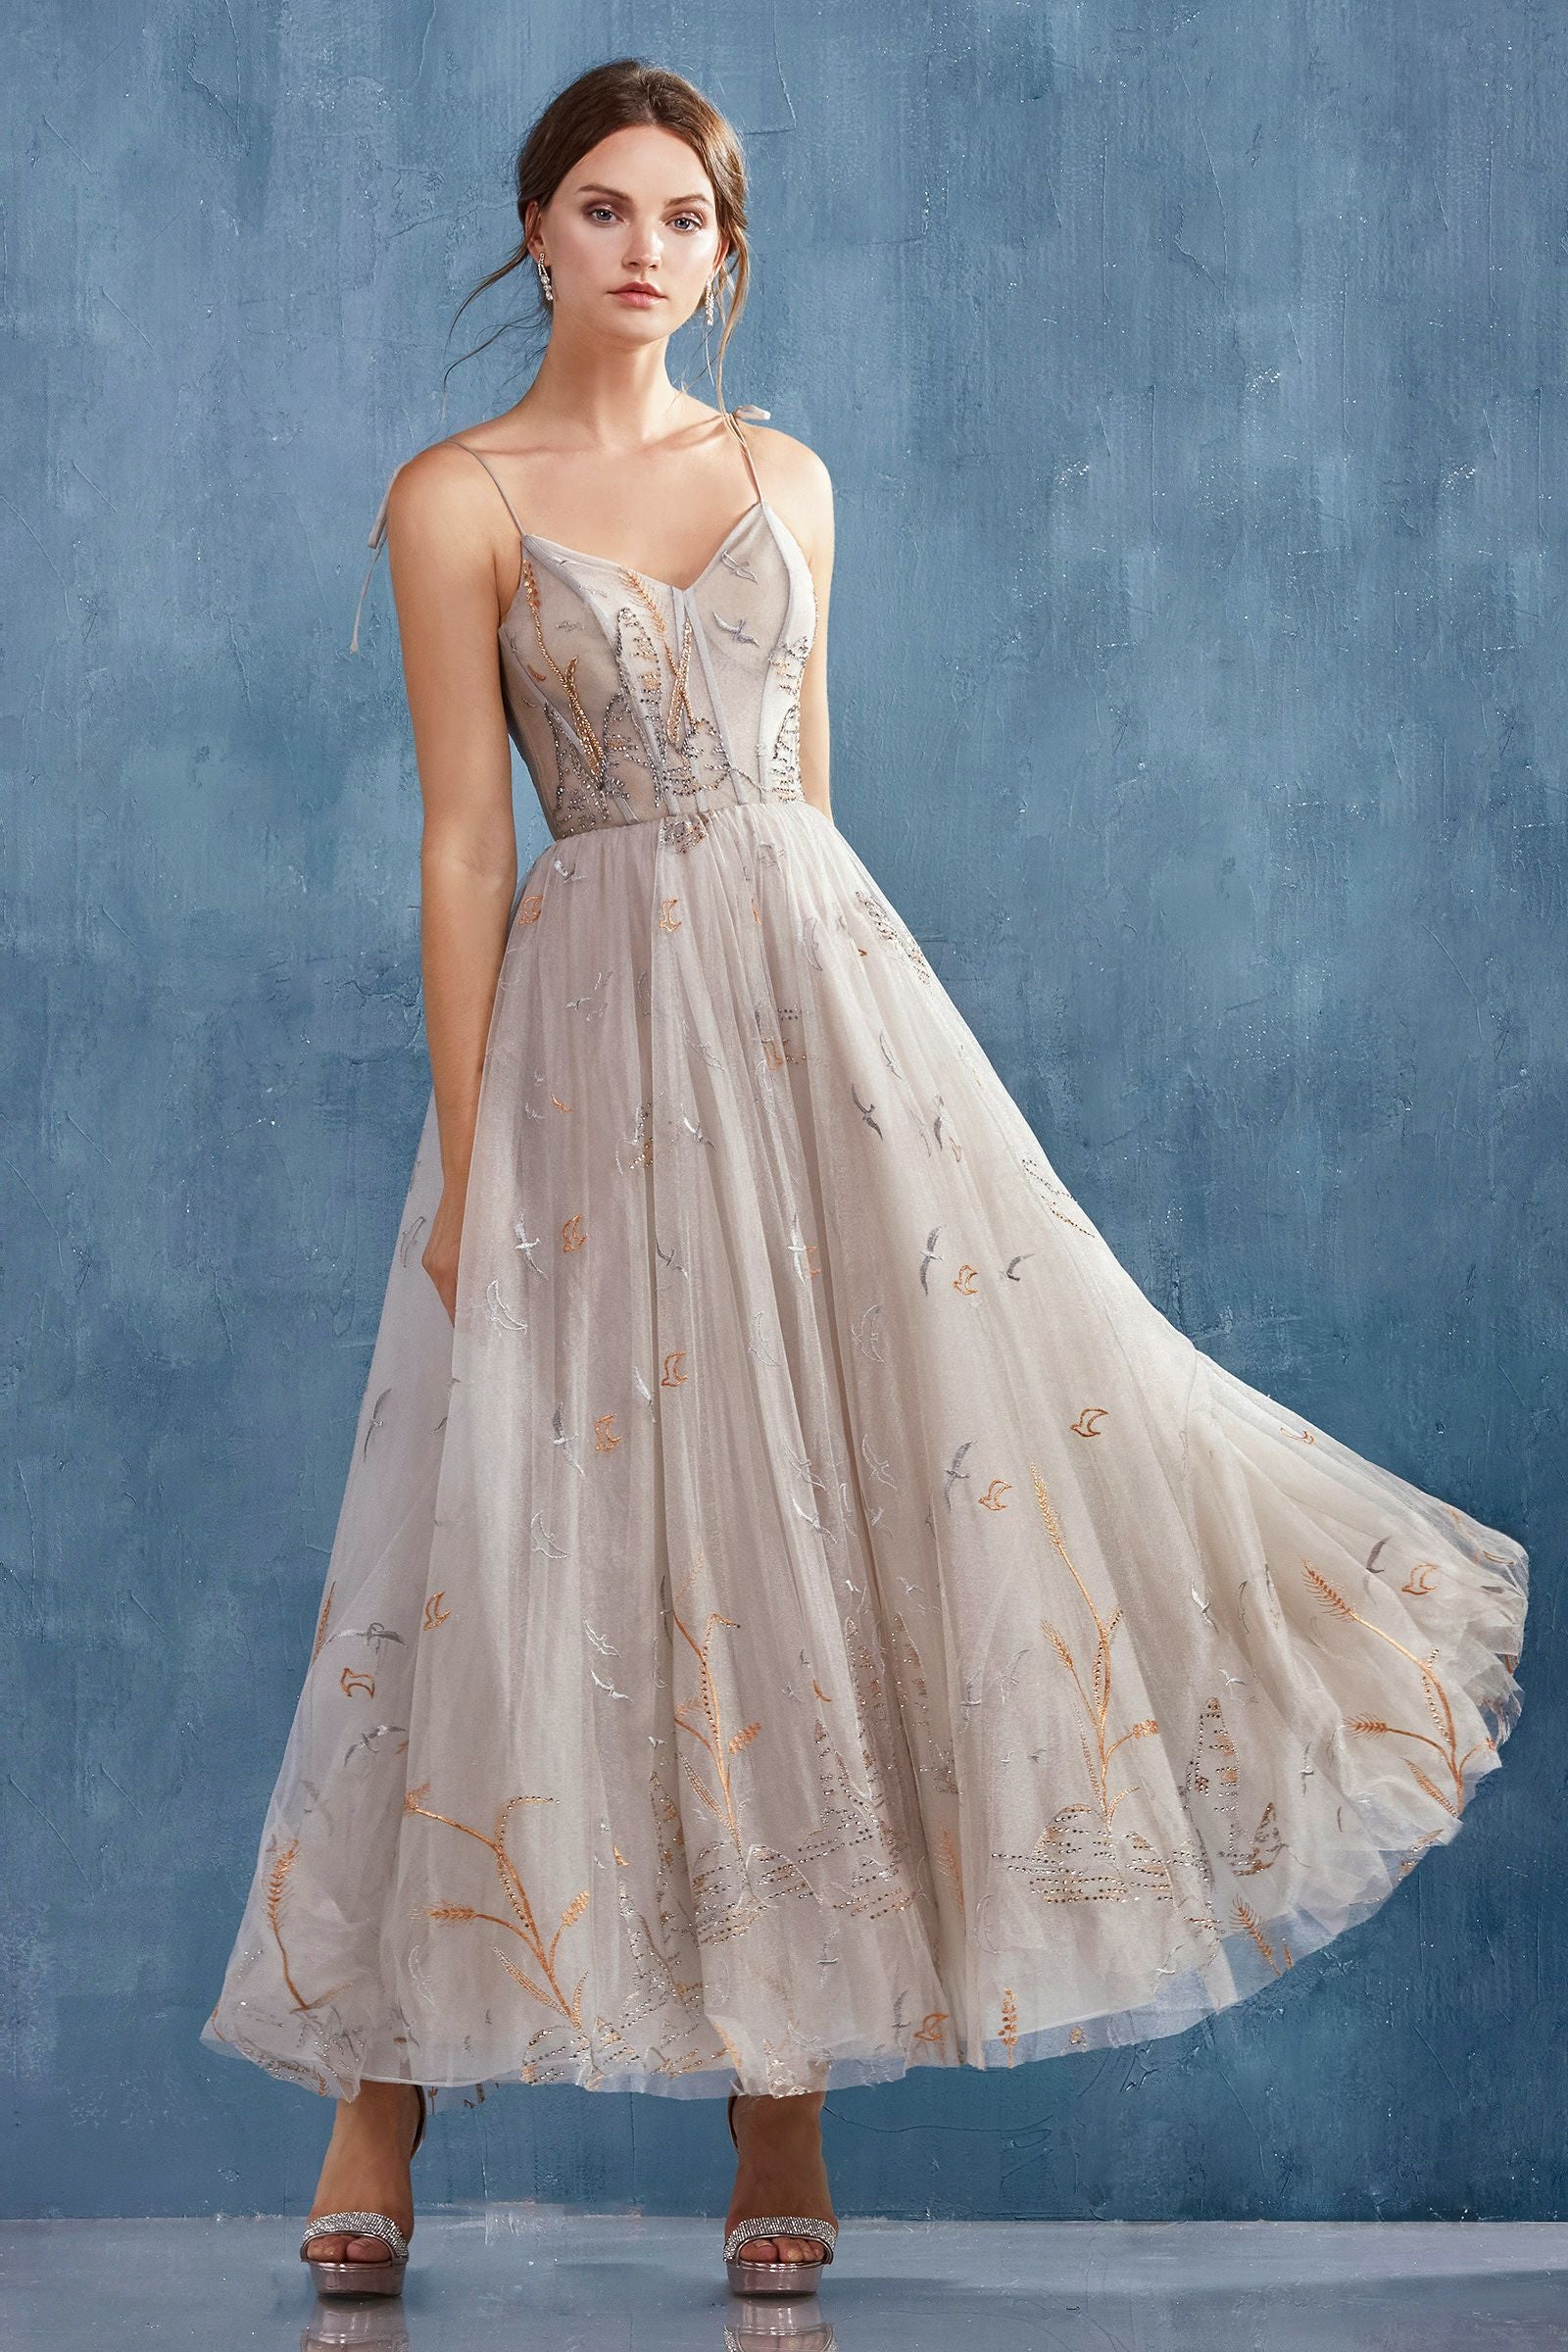 MyFashion.com - LAKE BIRDS EMBROIDERED TEA LENGTH DRESS. BACK ZIPPER CLOSURE.(A0987) - Andrea&Leo promdress eveningdress fashion partydress weddingdress 
 gown homecoming promgown weddinggown 